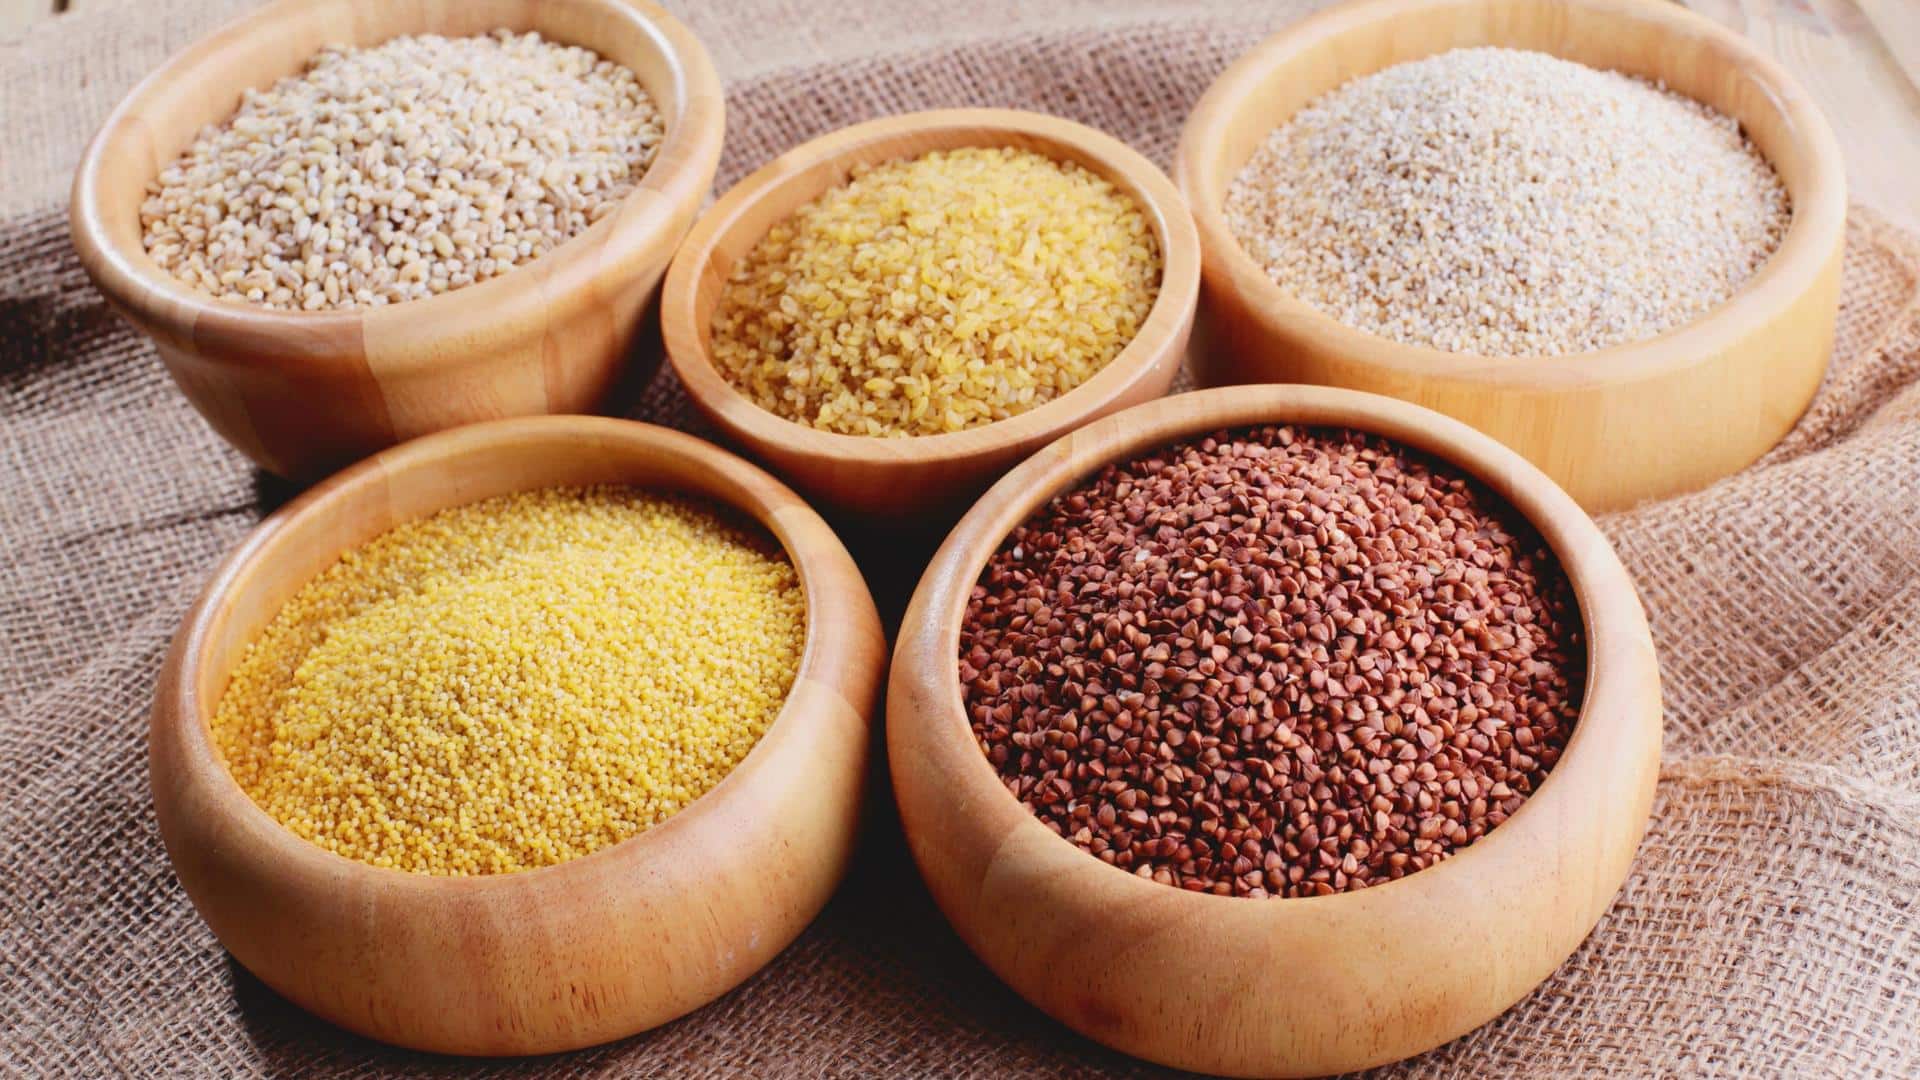 2023 is International Year of Millets! Know these 5 kinds